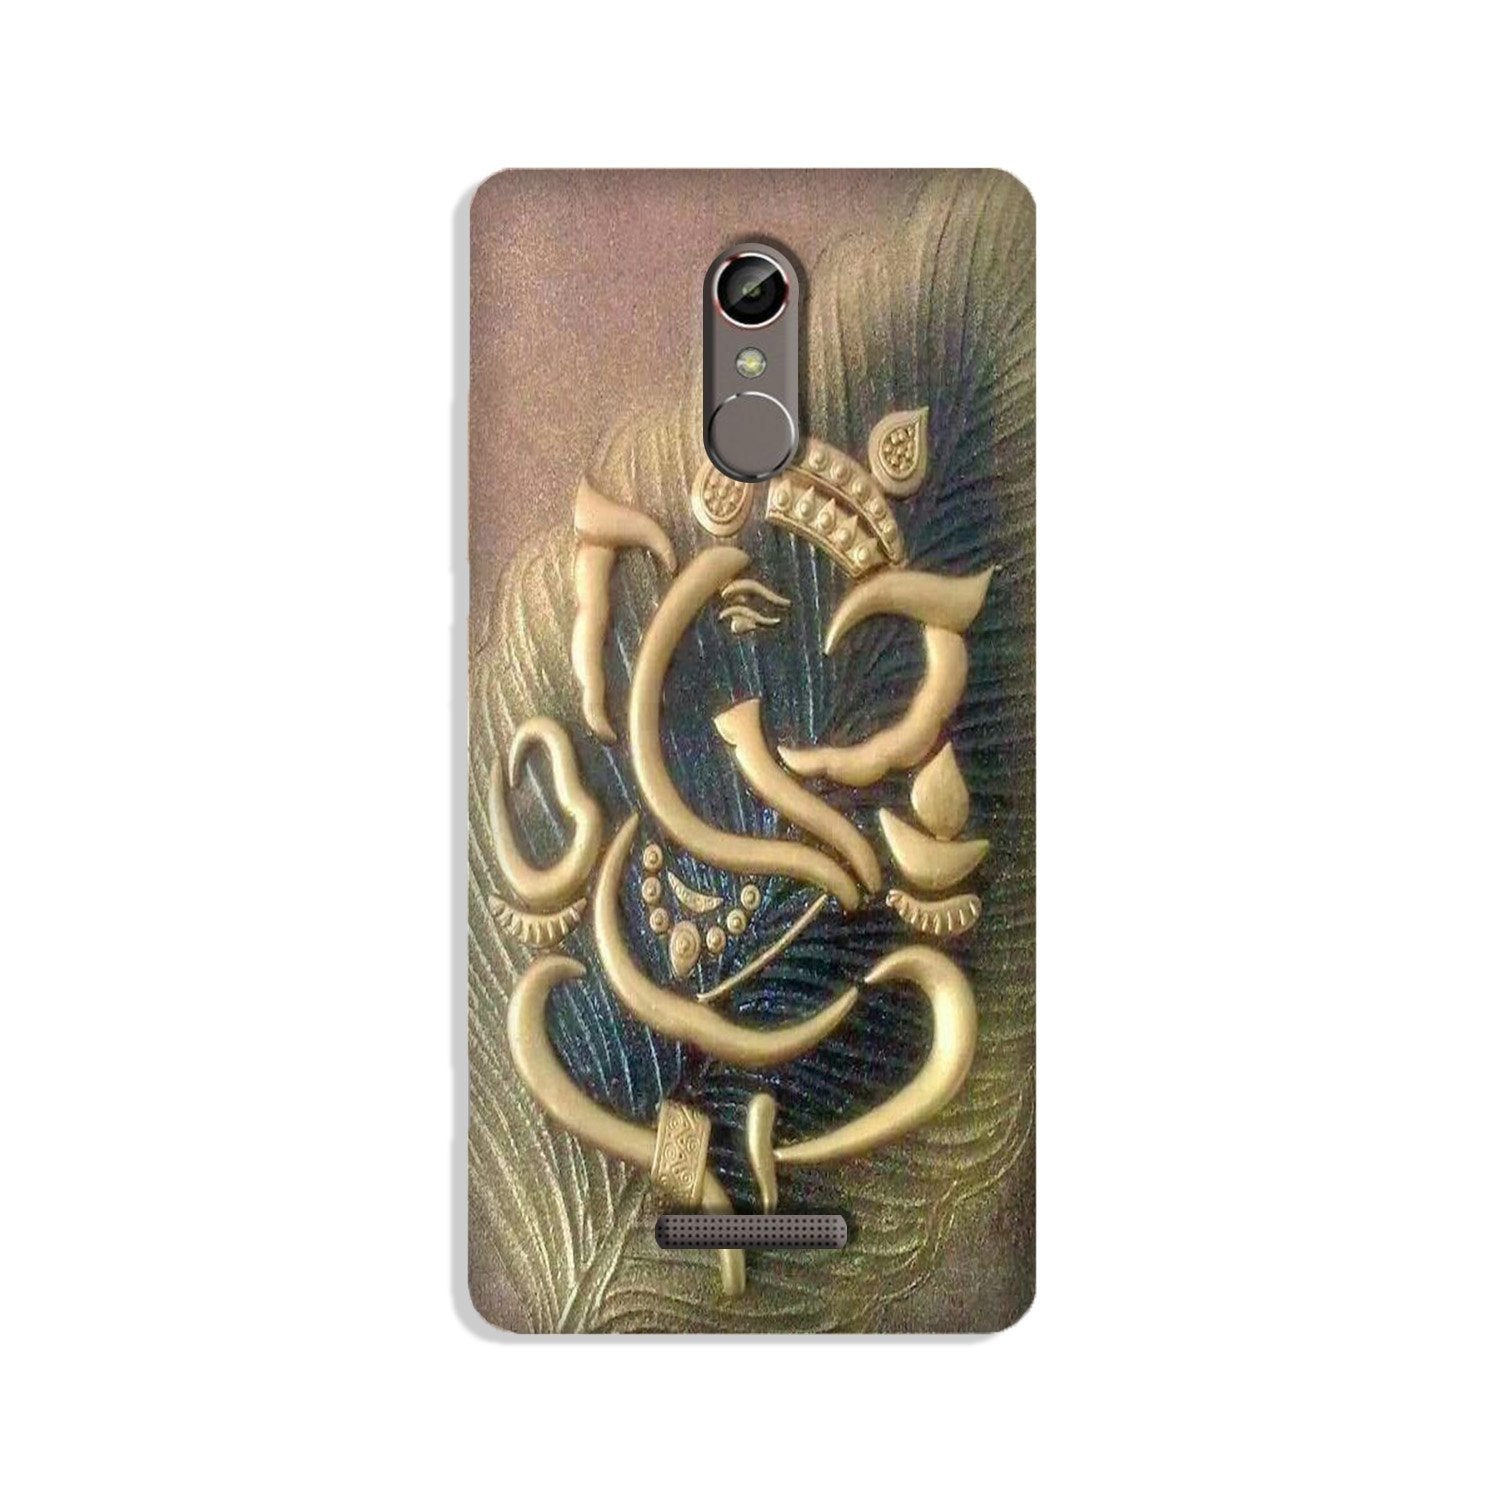 Lord Ganesha Case for Gionee S6s